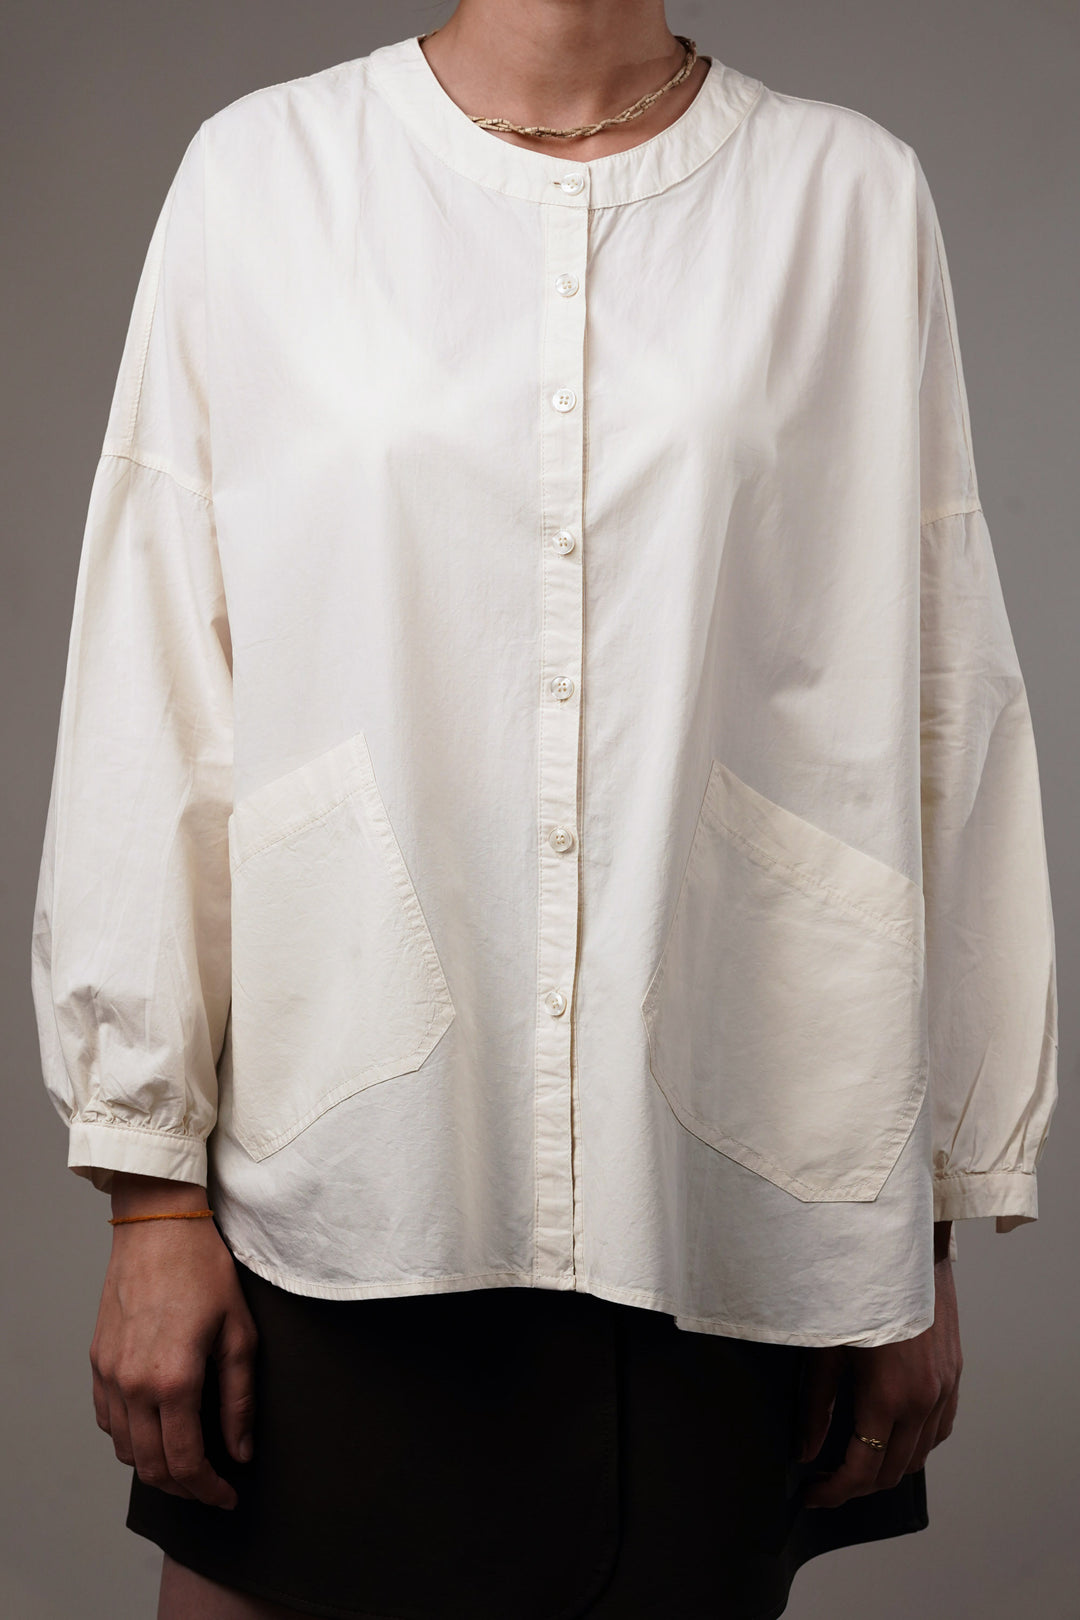 Oversized white shirt for casual wear